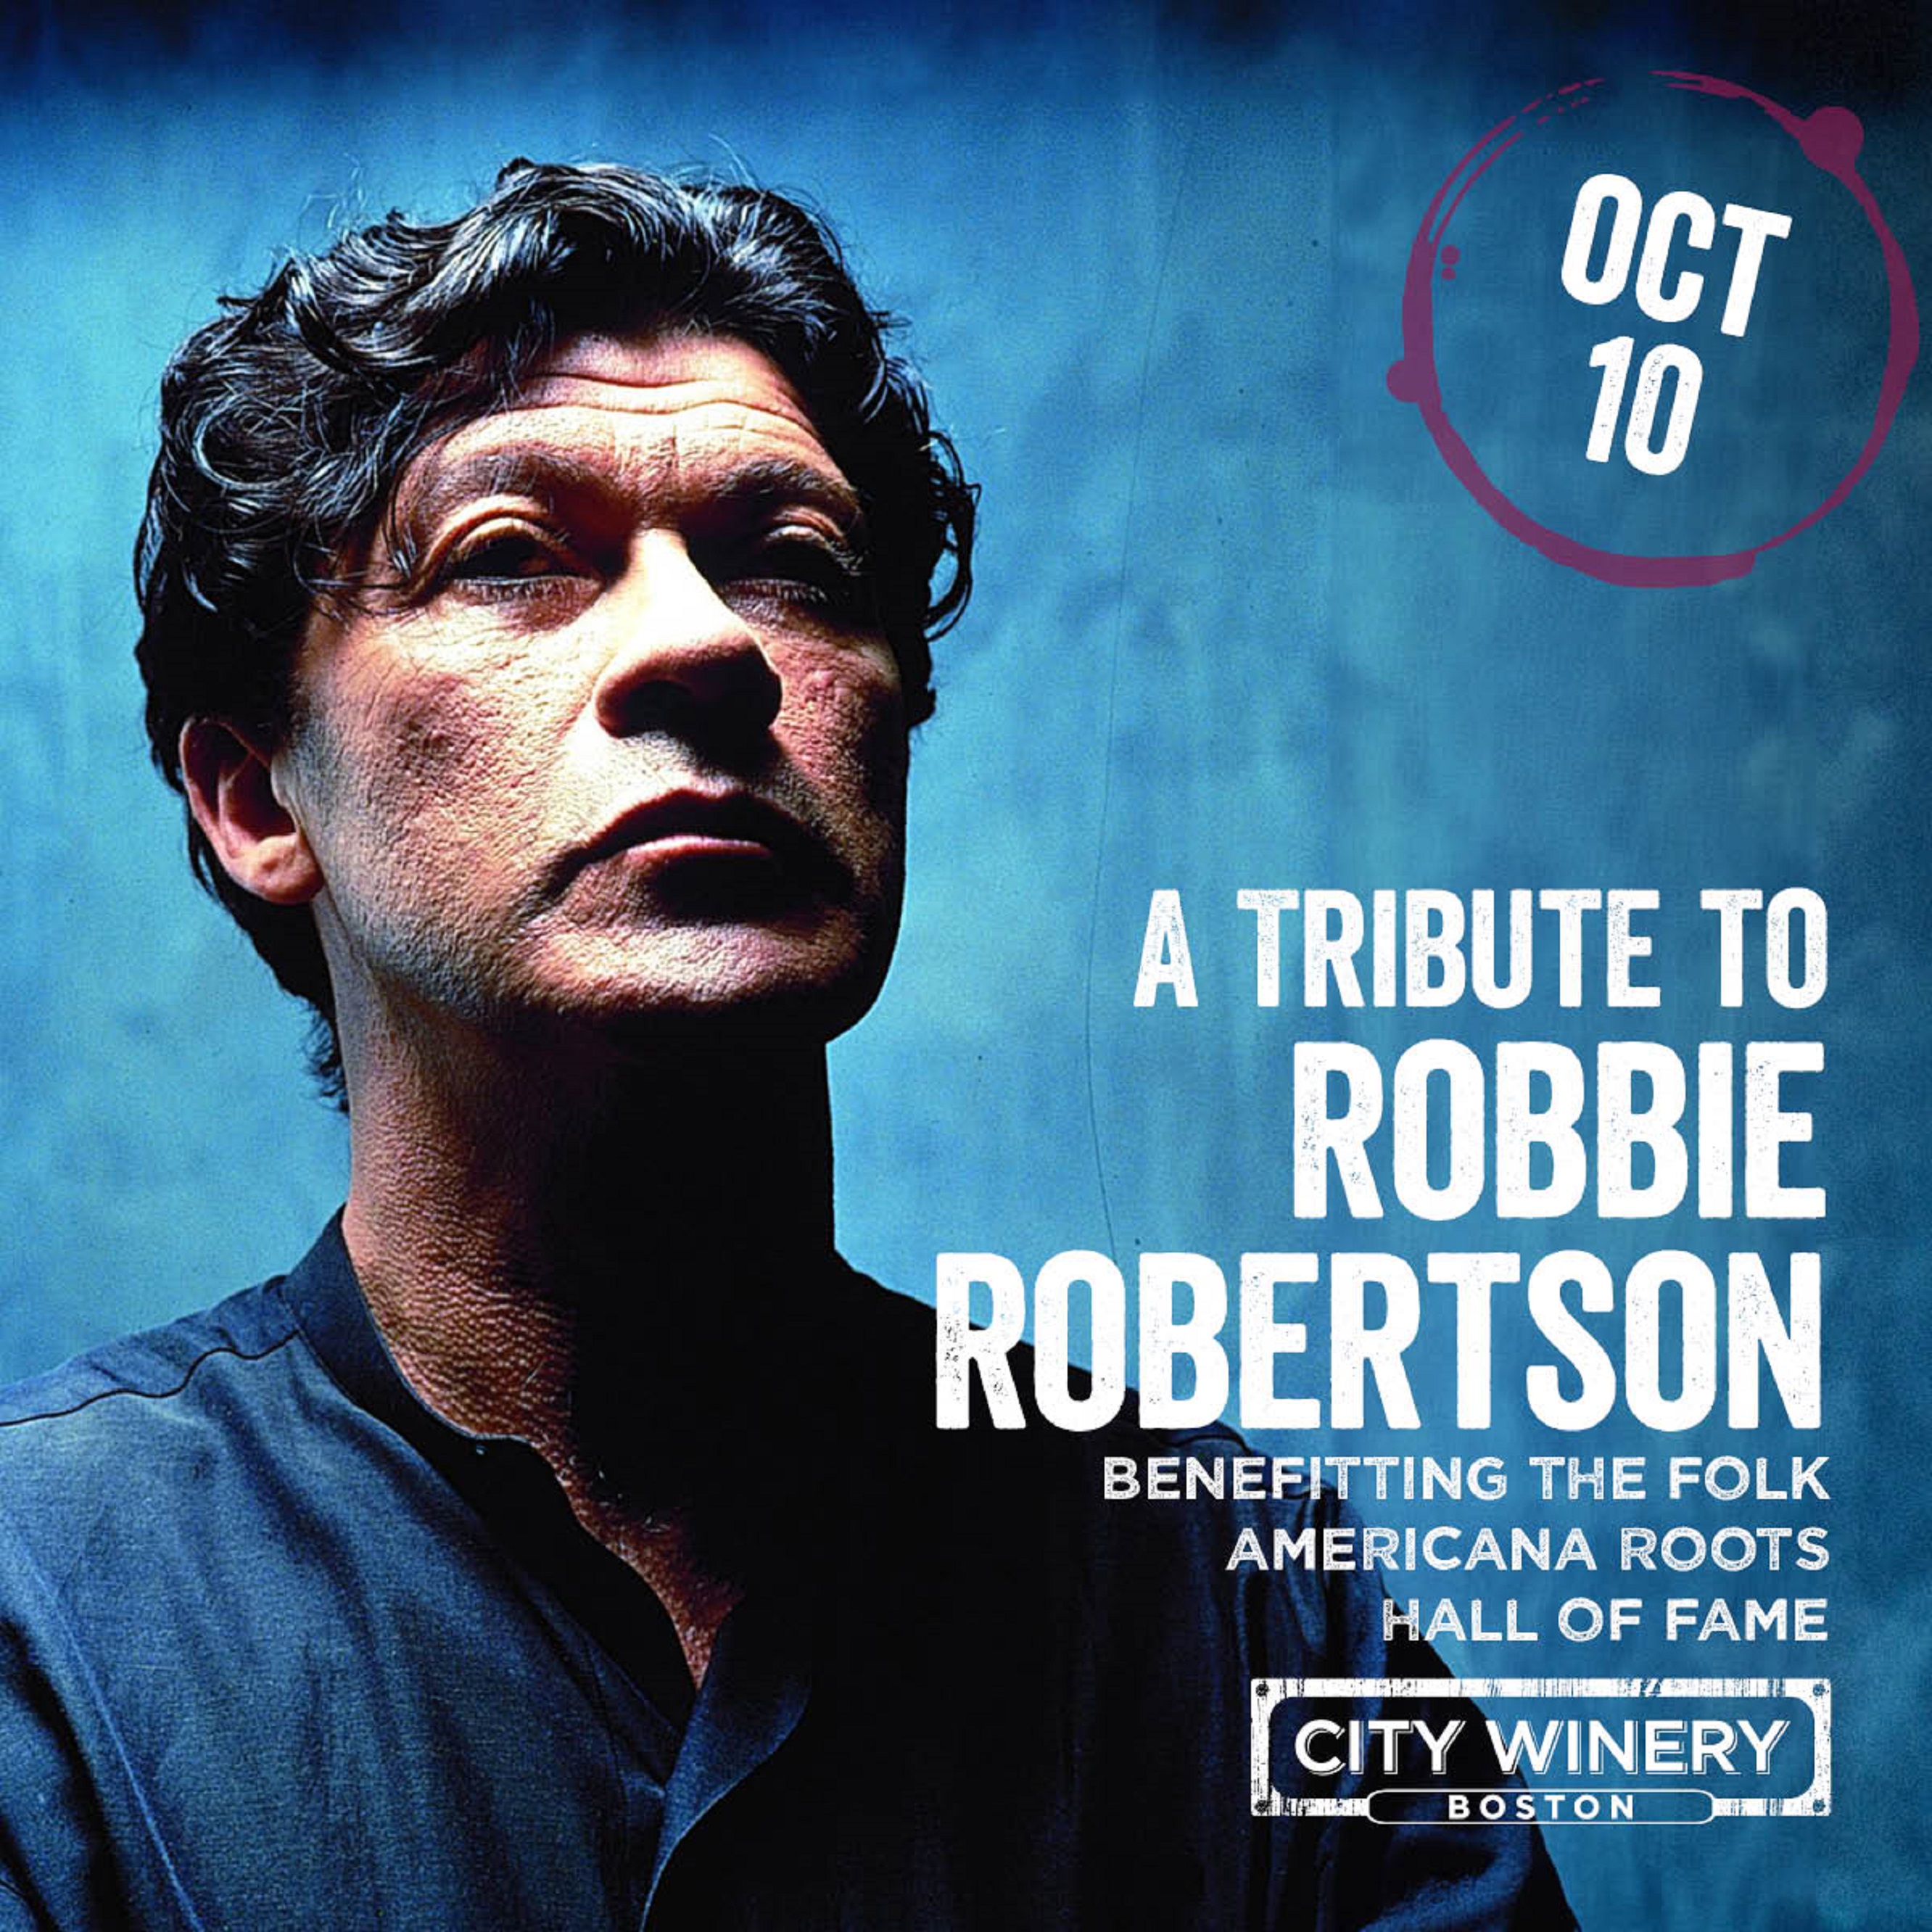  CITY WINERY BOSTON HOSTS A TRIBUTE TO ROBBIE ROBERTSON TO BENEFIT THE FOLK AMERICANA ROOTS HALL OF FAME